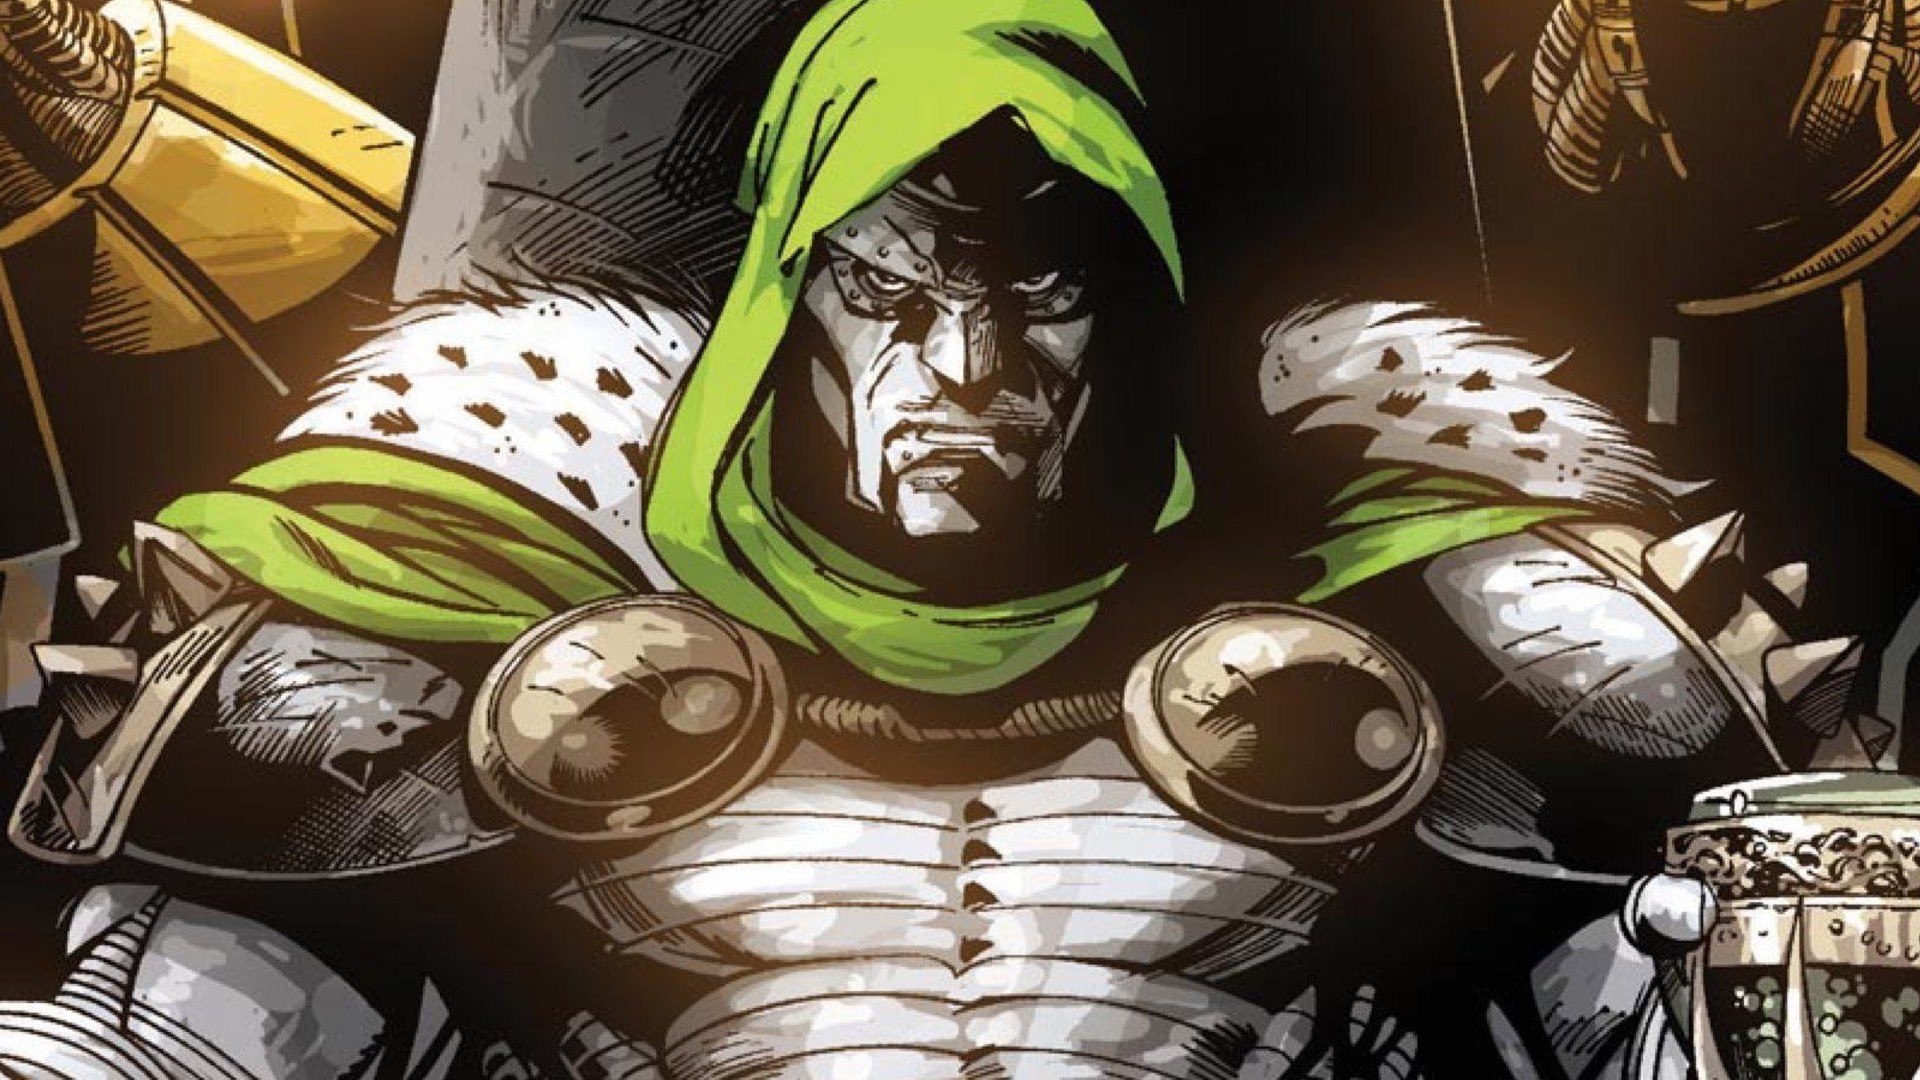 1920x1080 One Marvel film project at Fox that I've been looking forward to seeing is  Noah Hawley's Doctor Doom movie. We've got an update on that project for  you ...